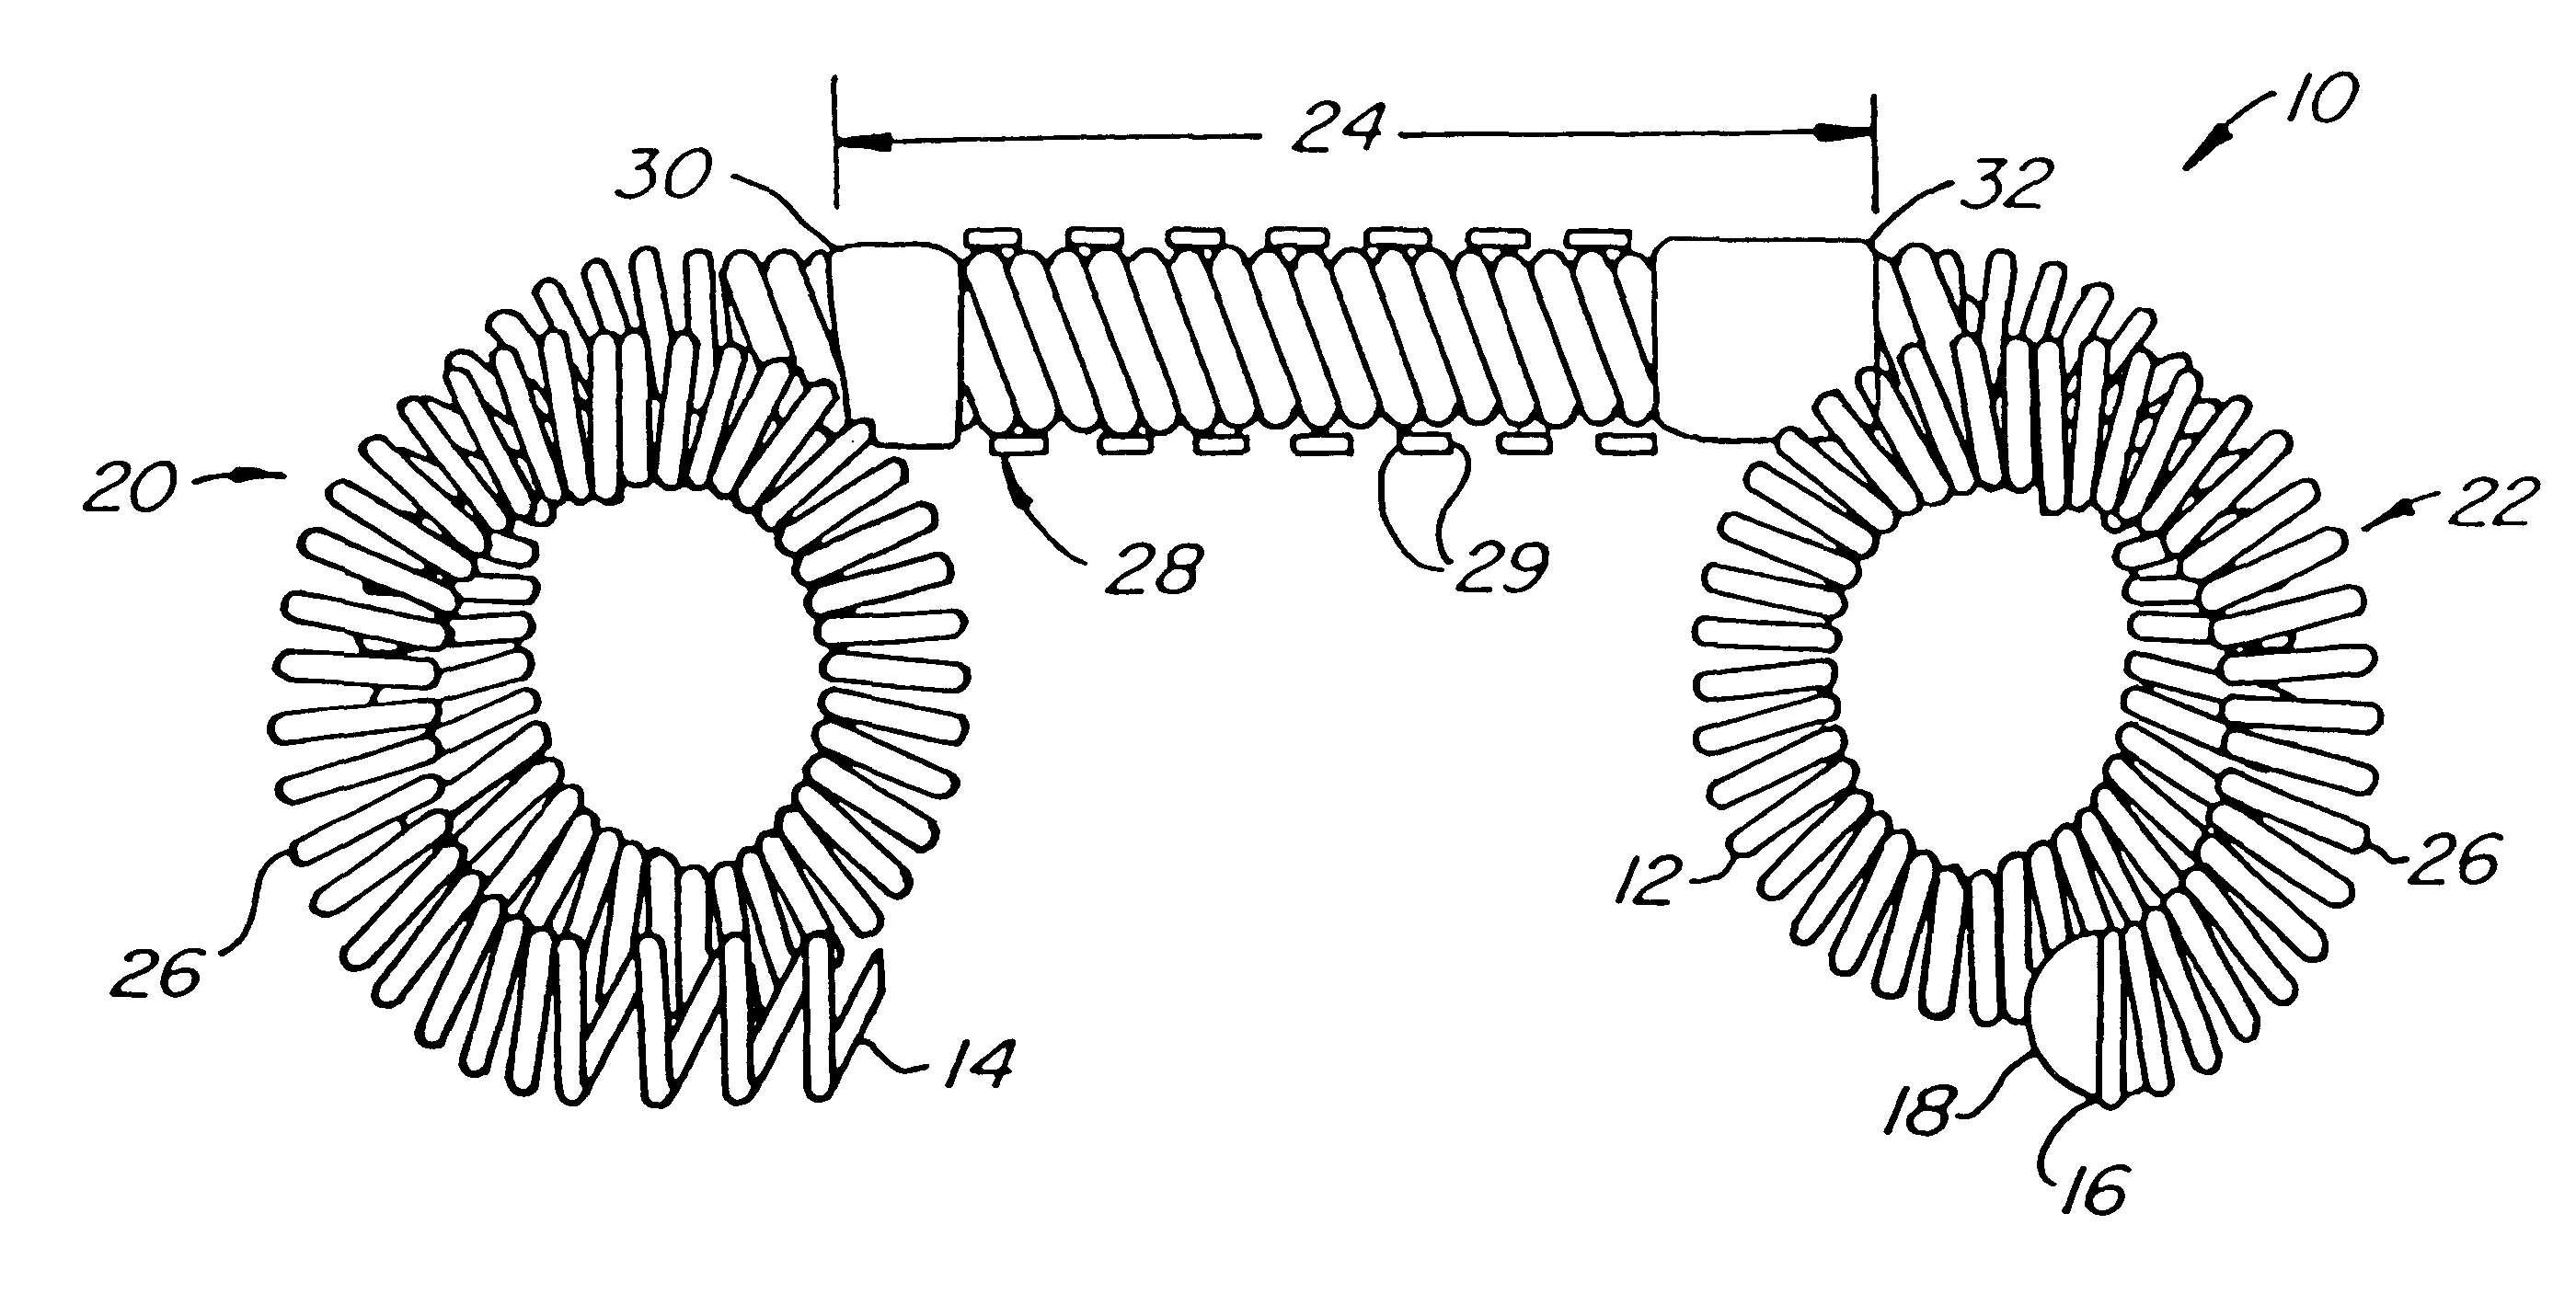 Contraceptive transcervical fallopian tube occlusion devices and methods